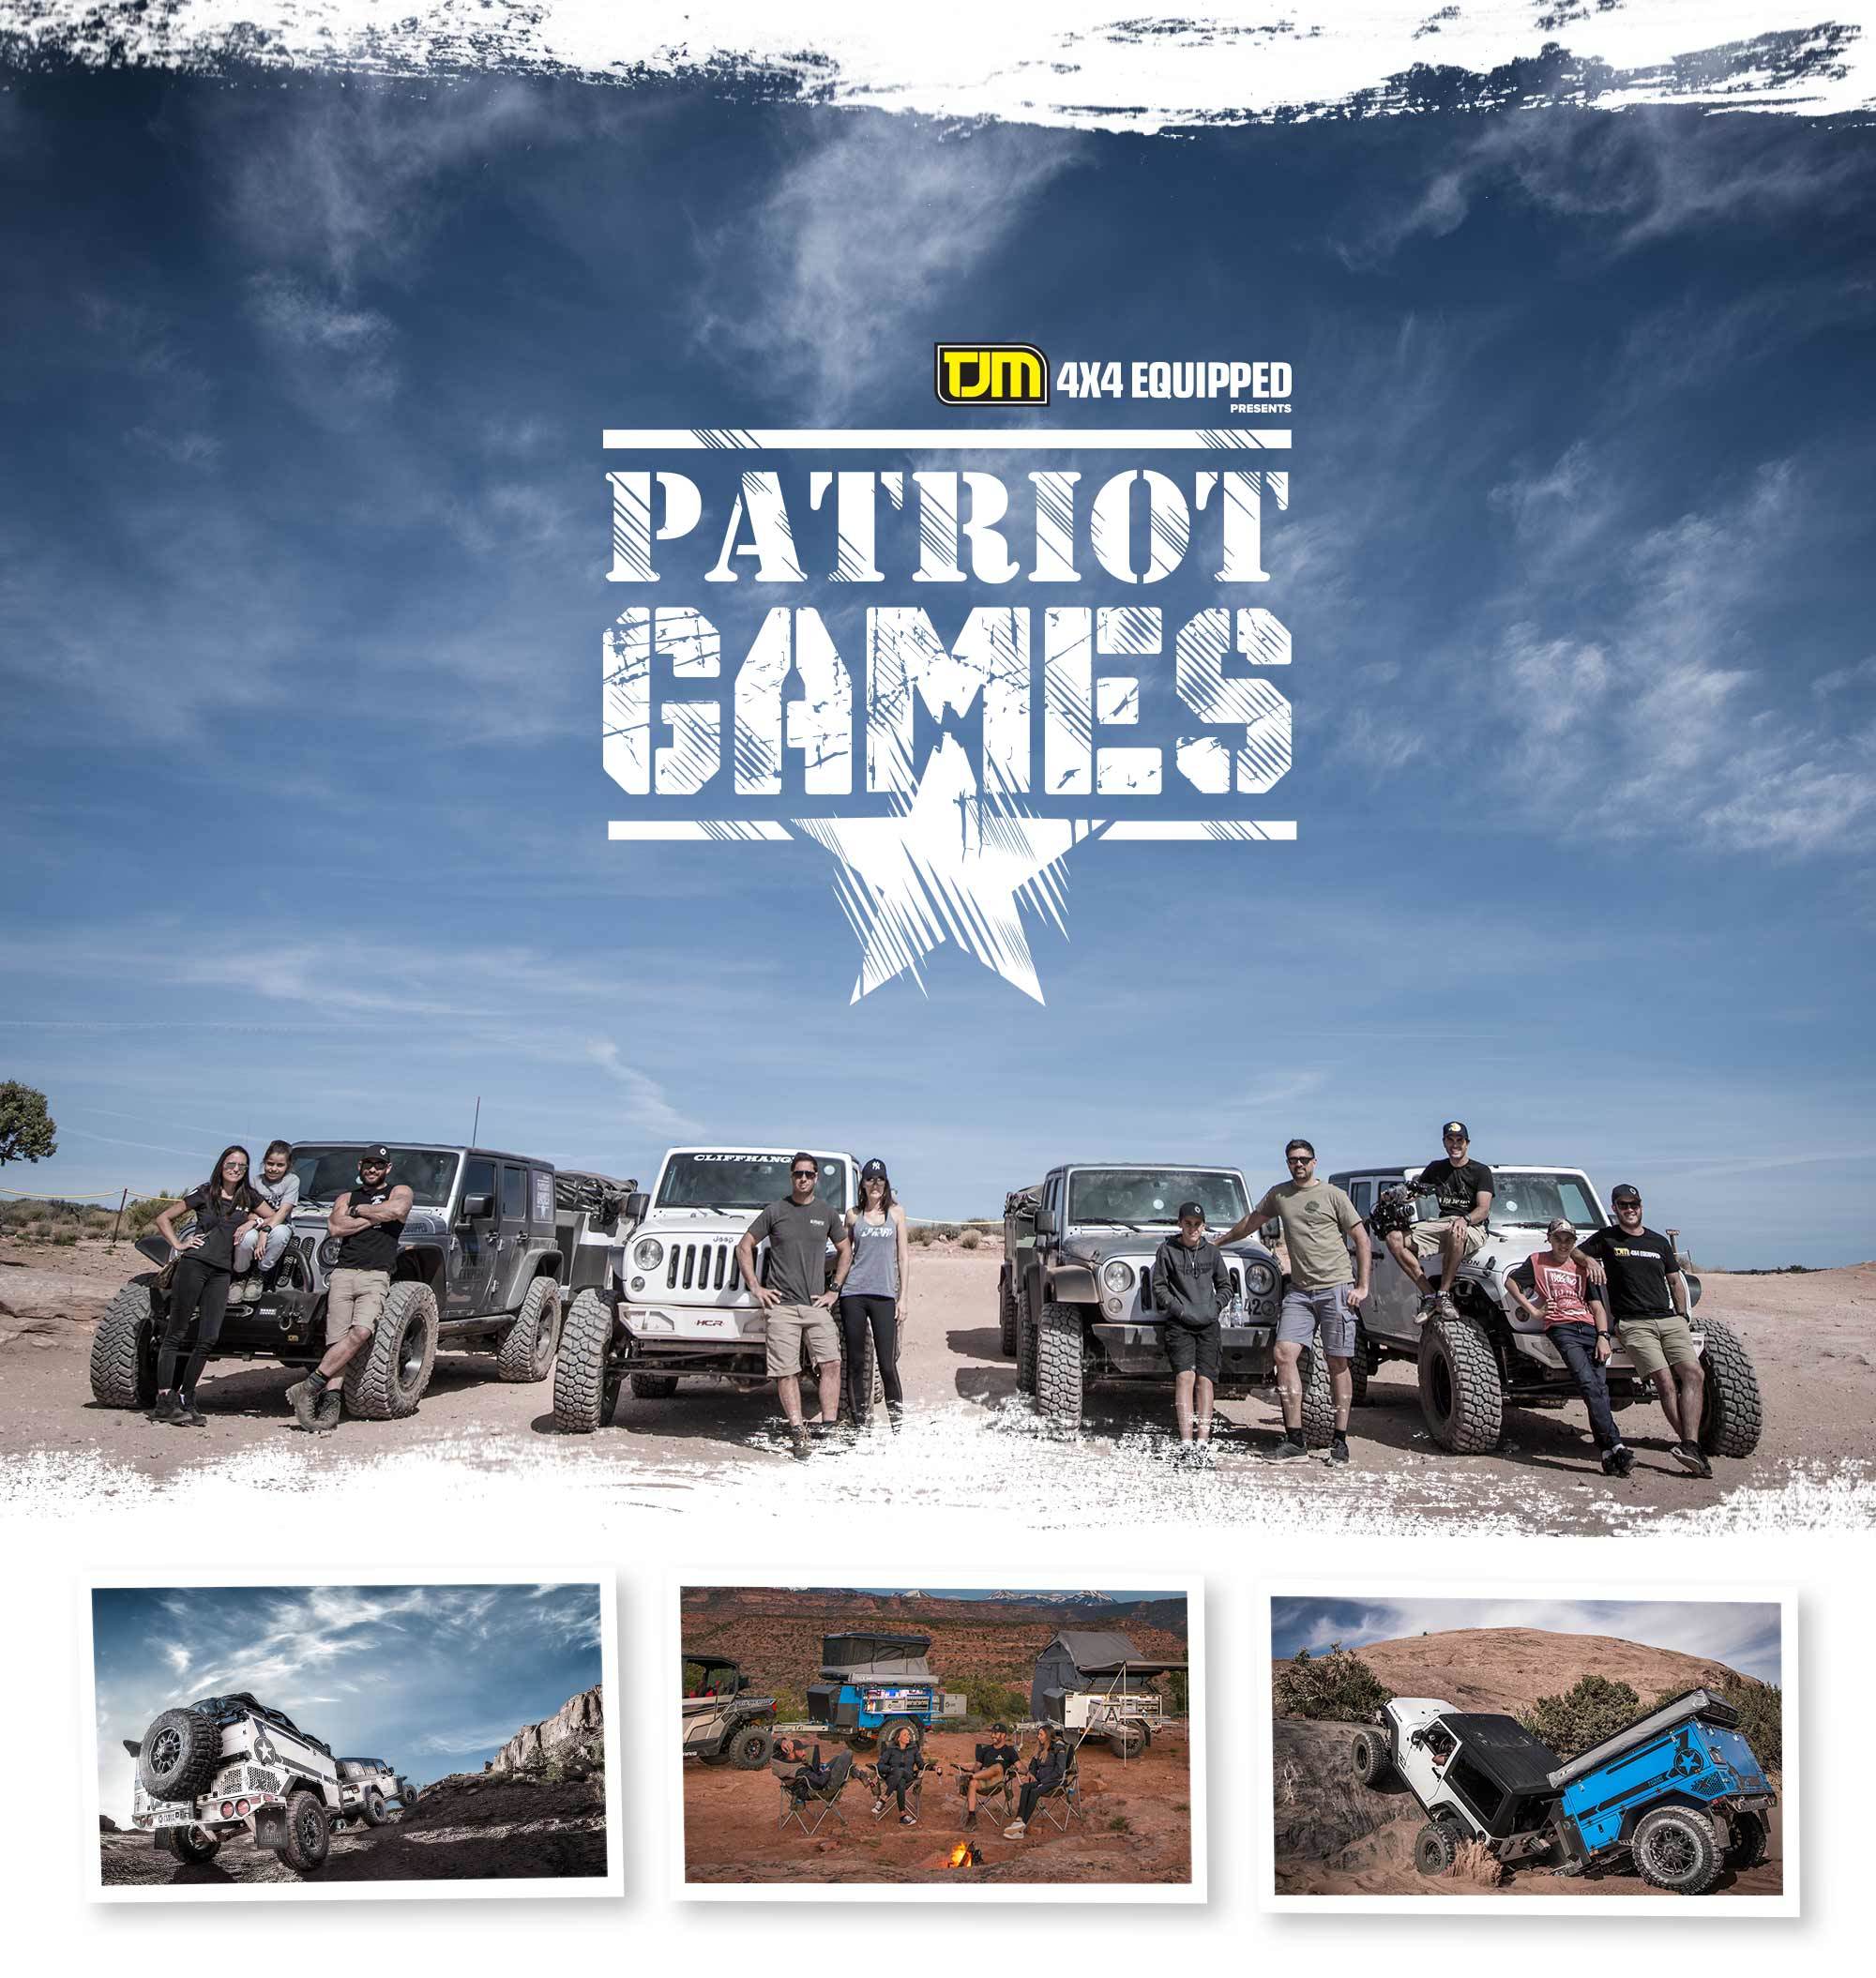 Camping Trailers - Patriot Campers